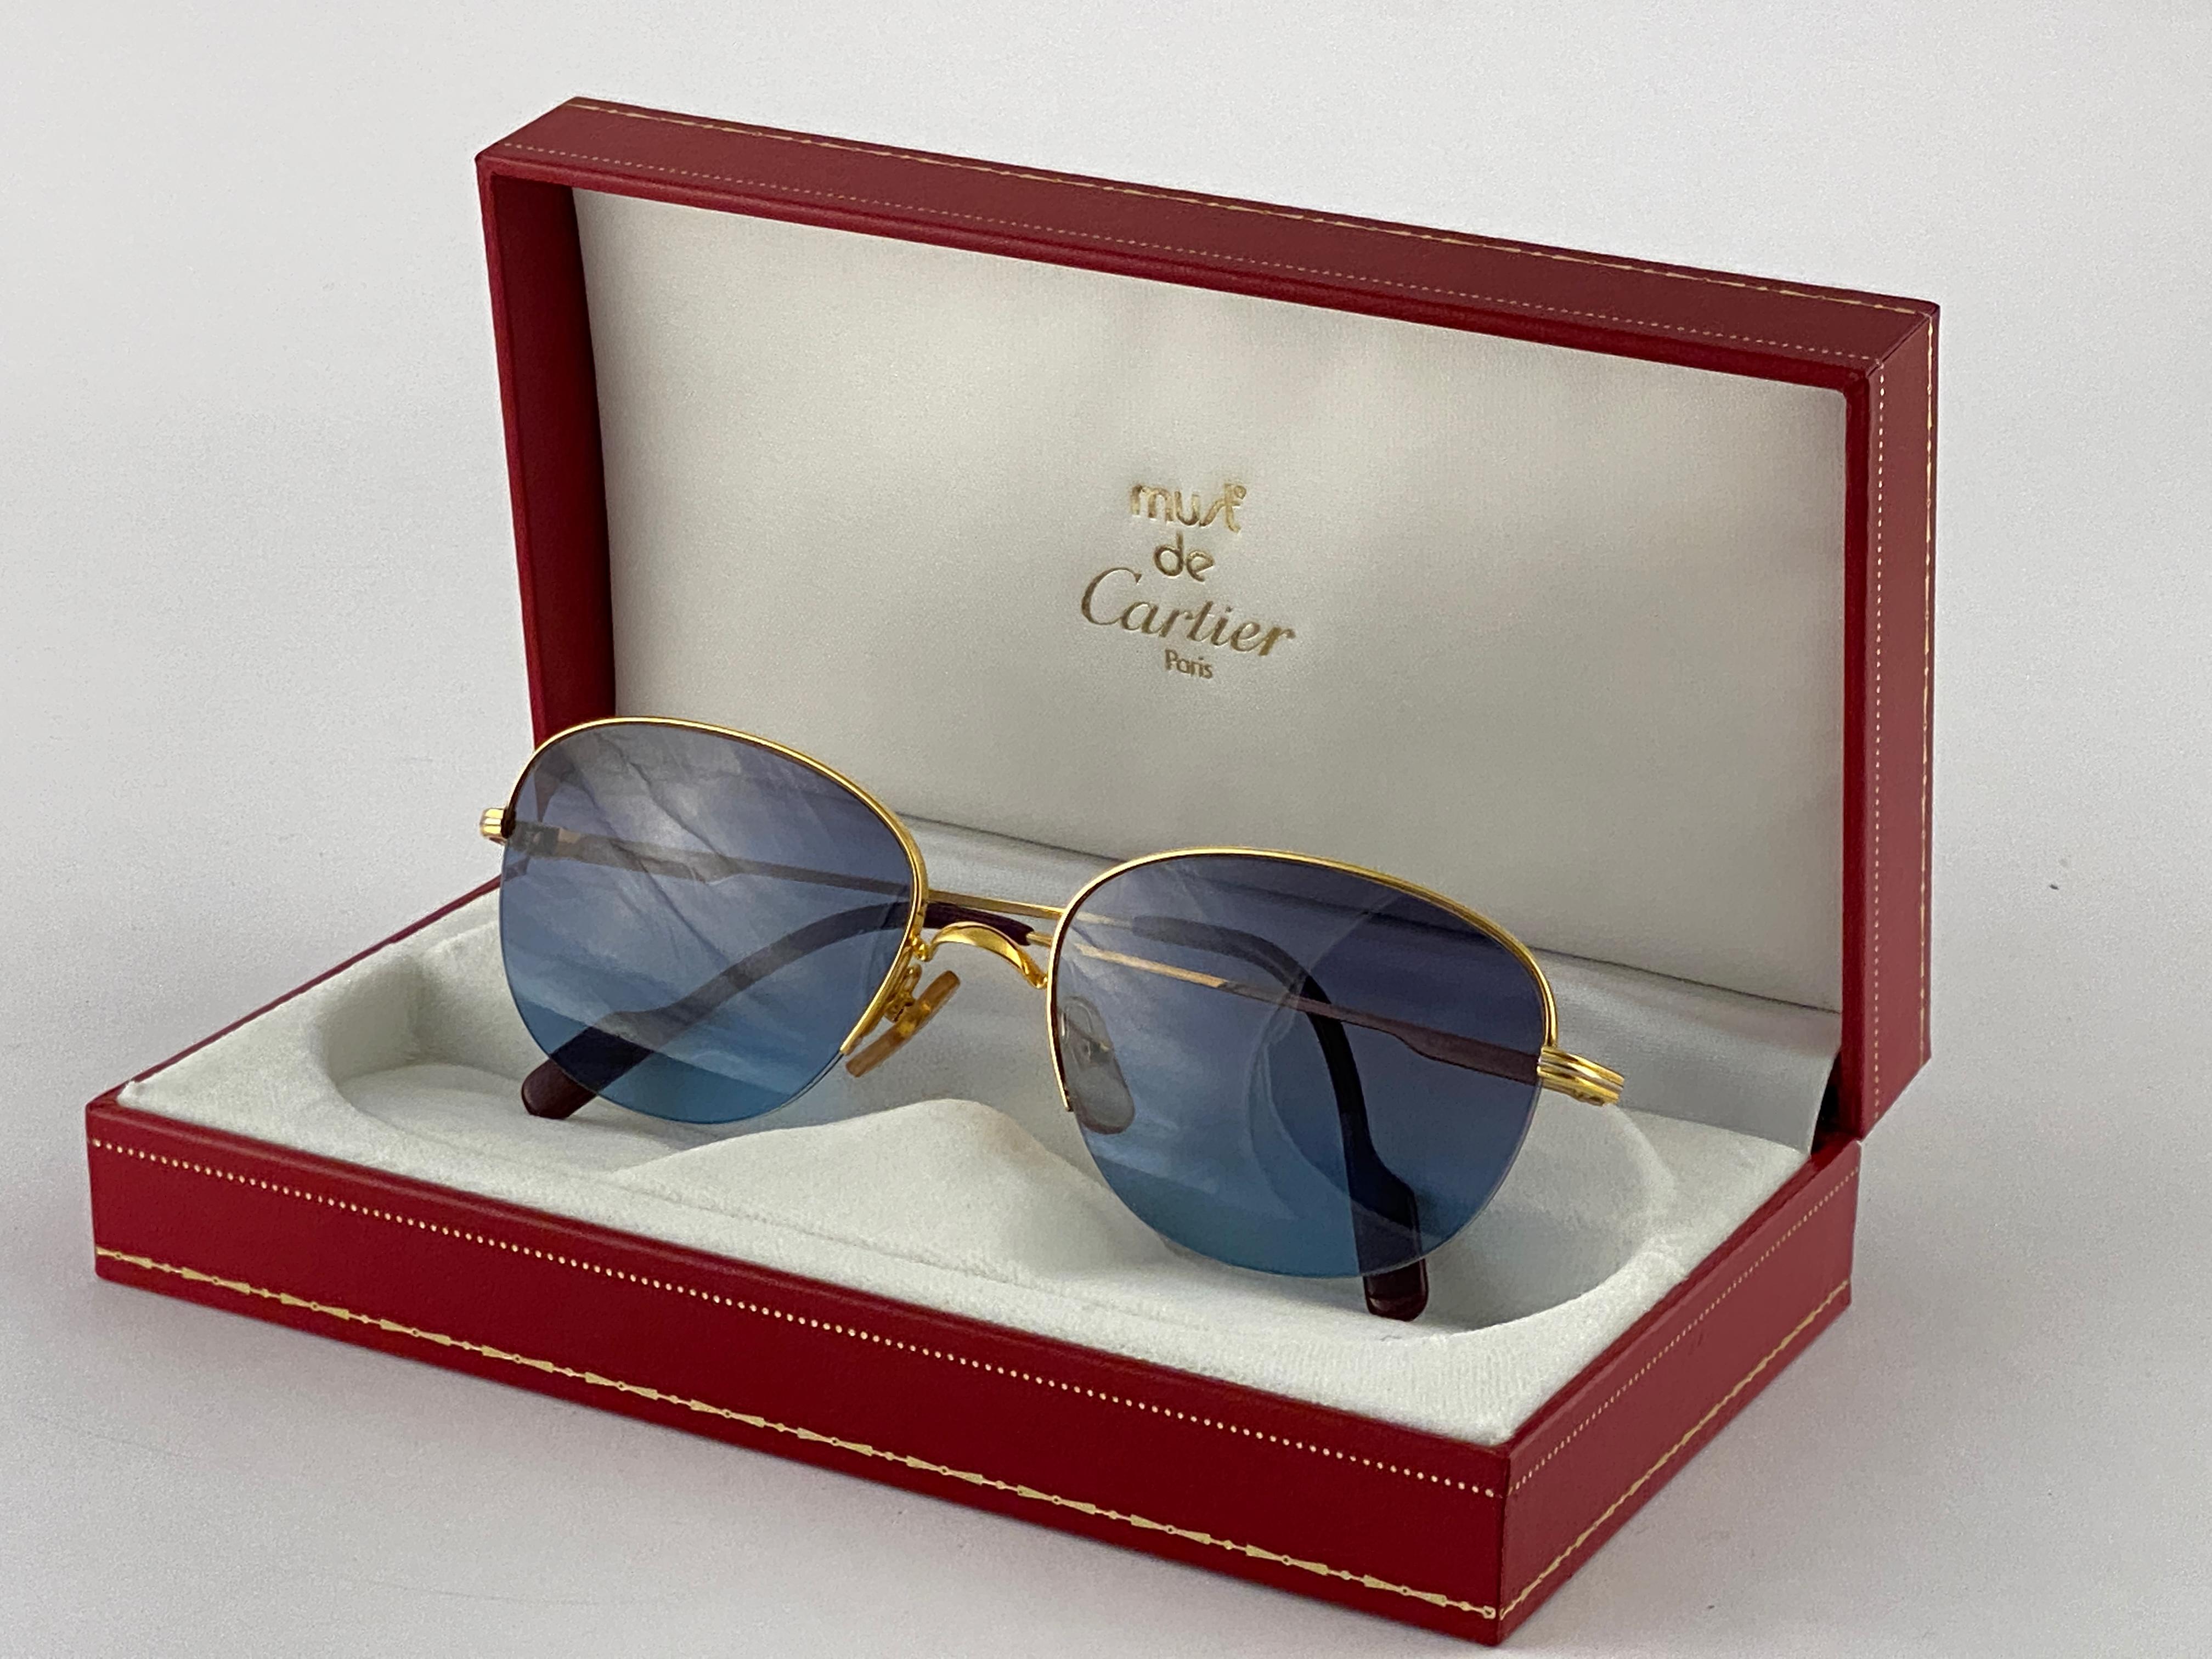 Cartier Montaigne Half Frame 55mm Sunglasses 18k Gold Sunglasses France In New Condition For Sale In Baleares, Baleares